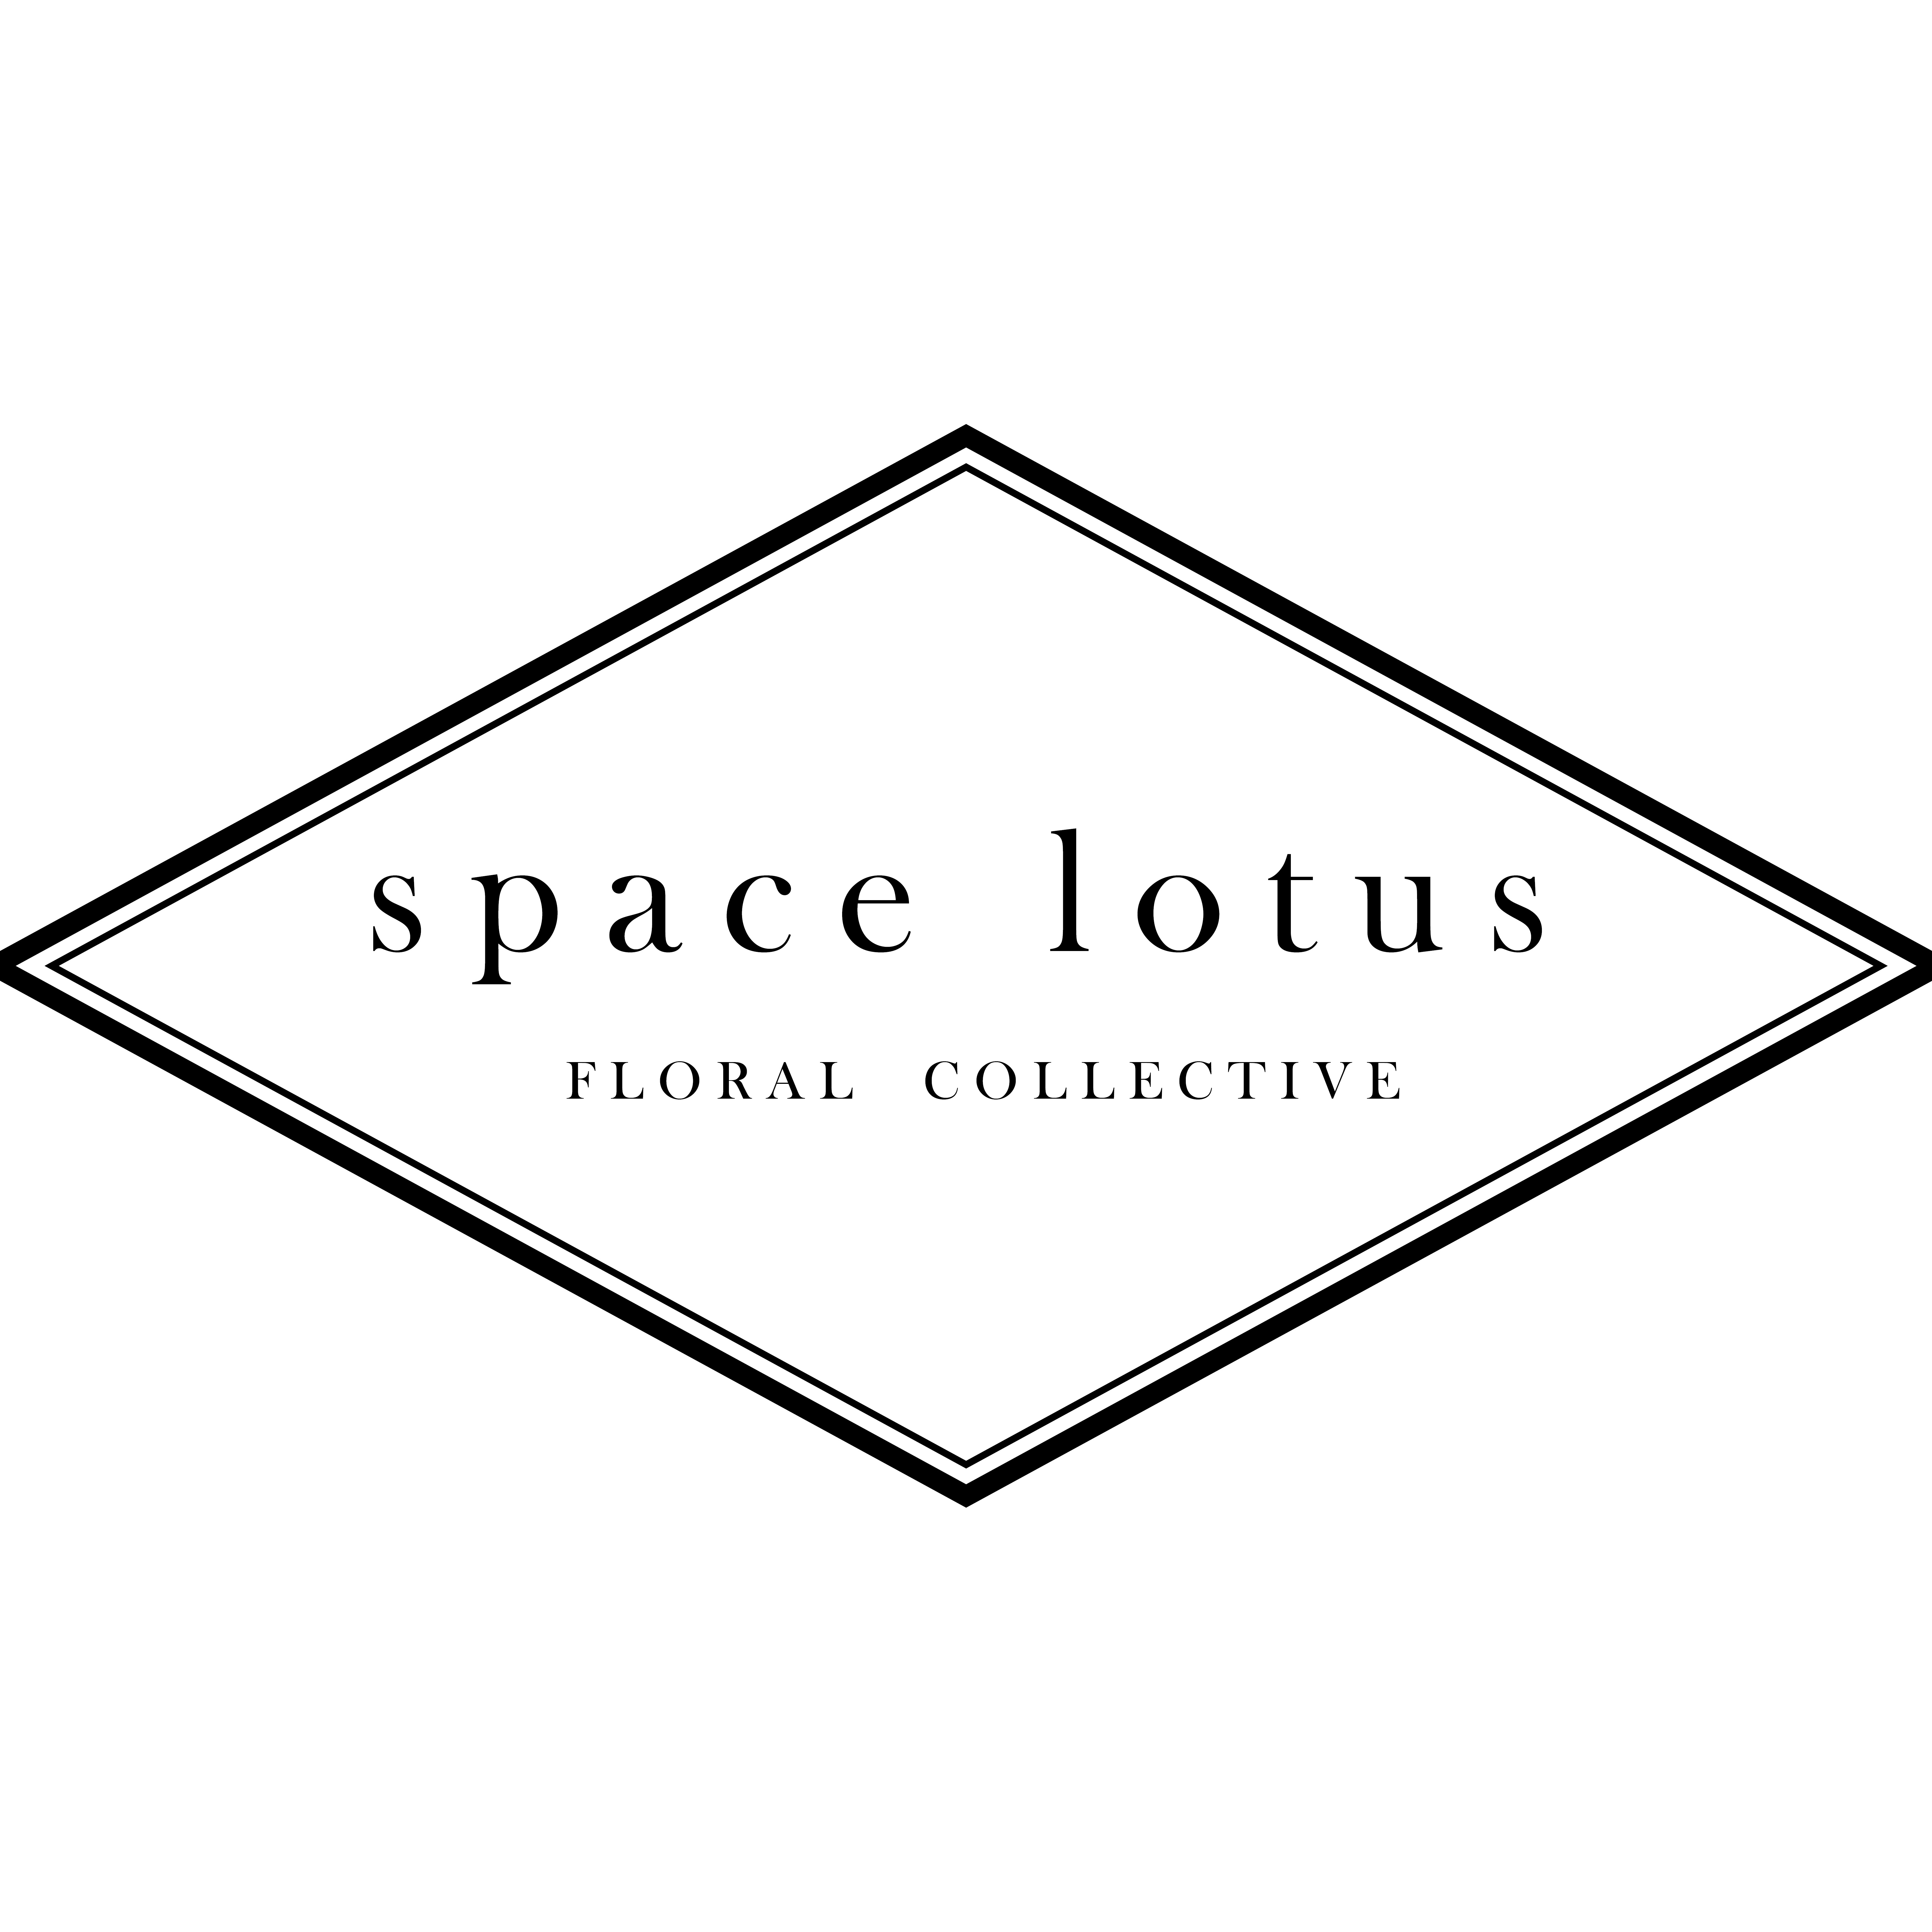 Space Lotus Floral Collective